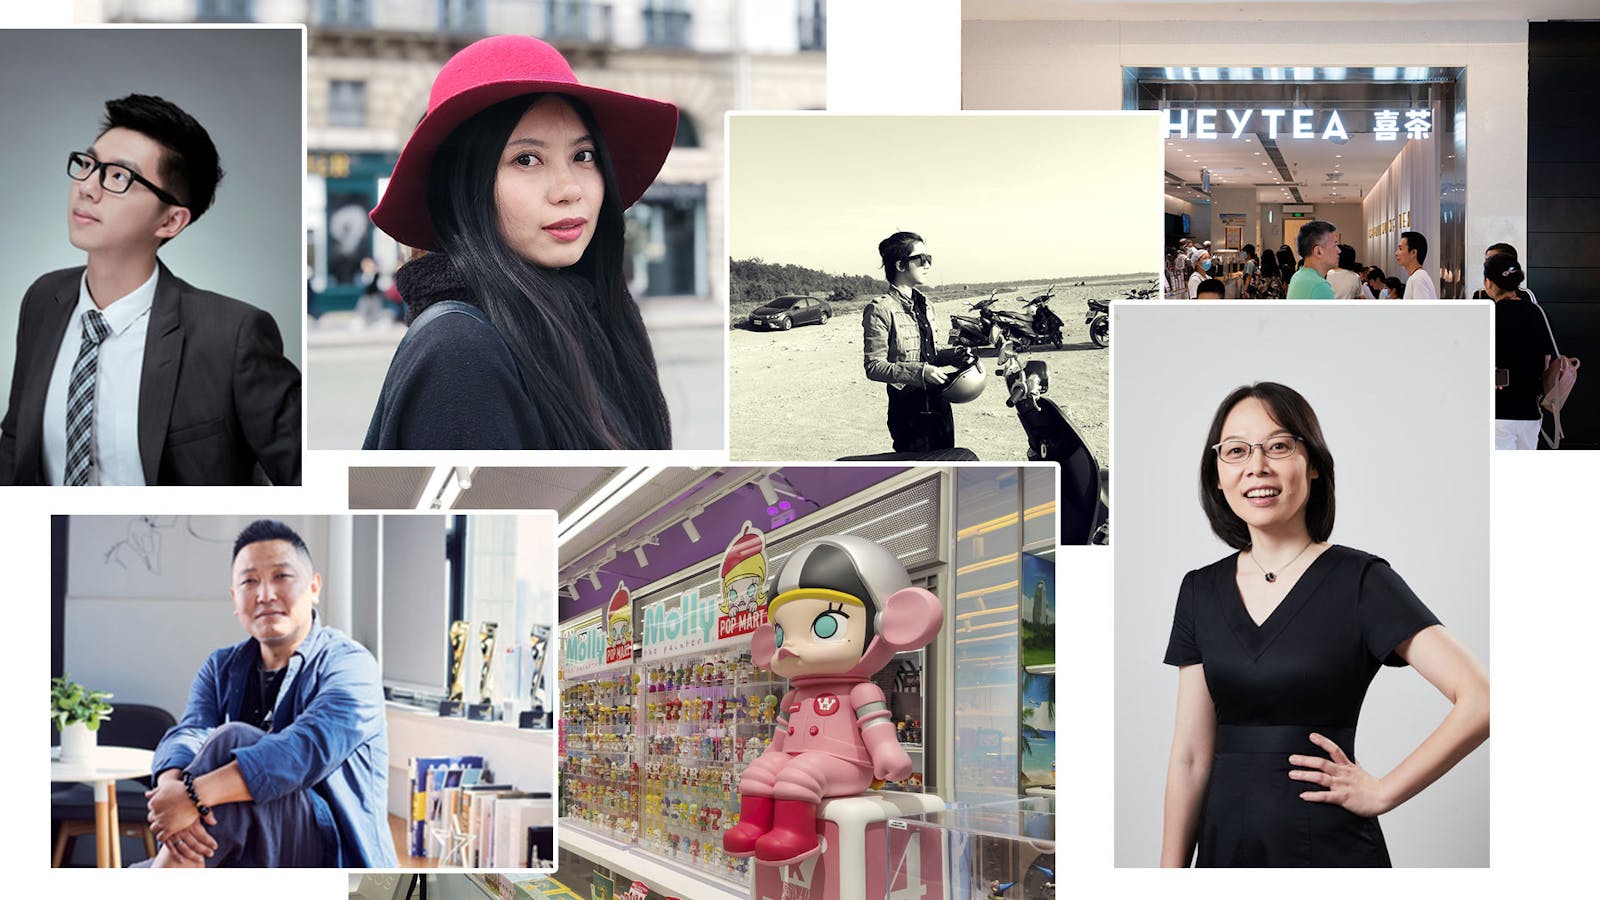 Clockwise from top-left: Moody CEO,  Ci Ran; PMPM co-founder Wen Tzu; PMPM co-founder Shan Shuo; customers at a HEYTEA store in Chongqing, China (AP); Ubras founder and CEO, Tou Yaqian; a Pop Mart store in Shanghai (AP); Chicecream CEO, Lin Sheng.